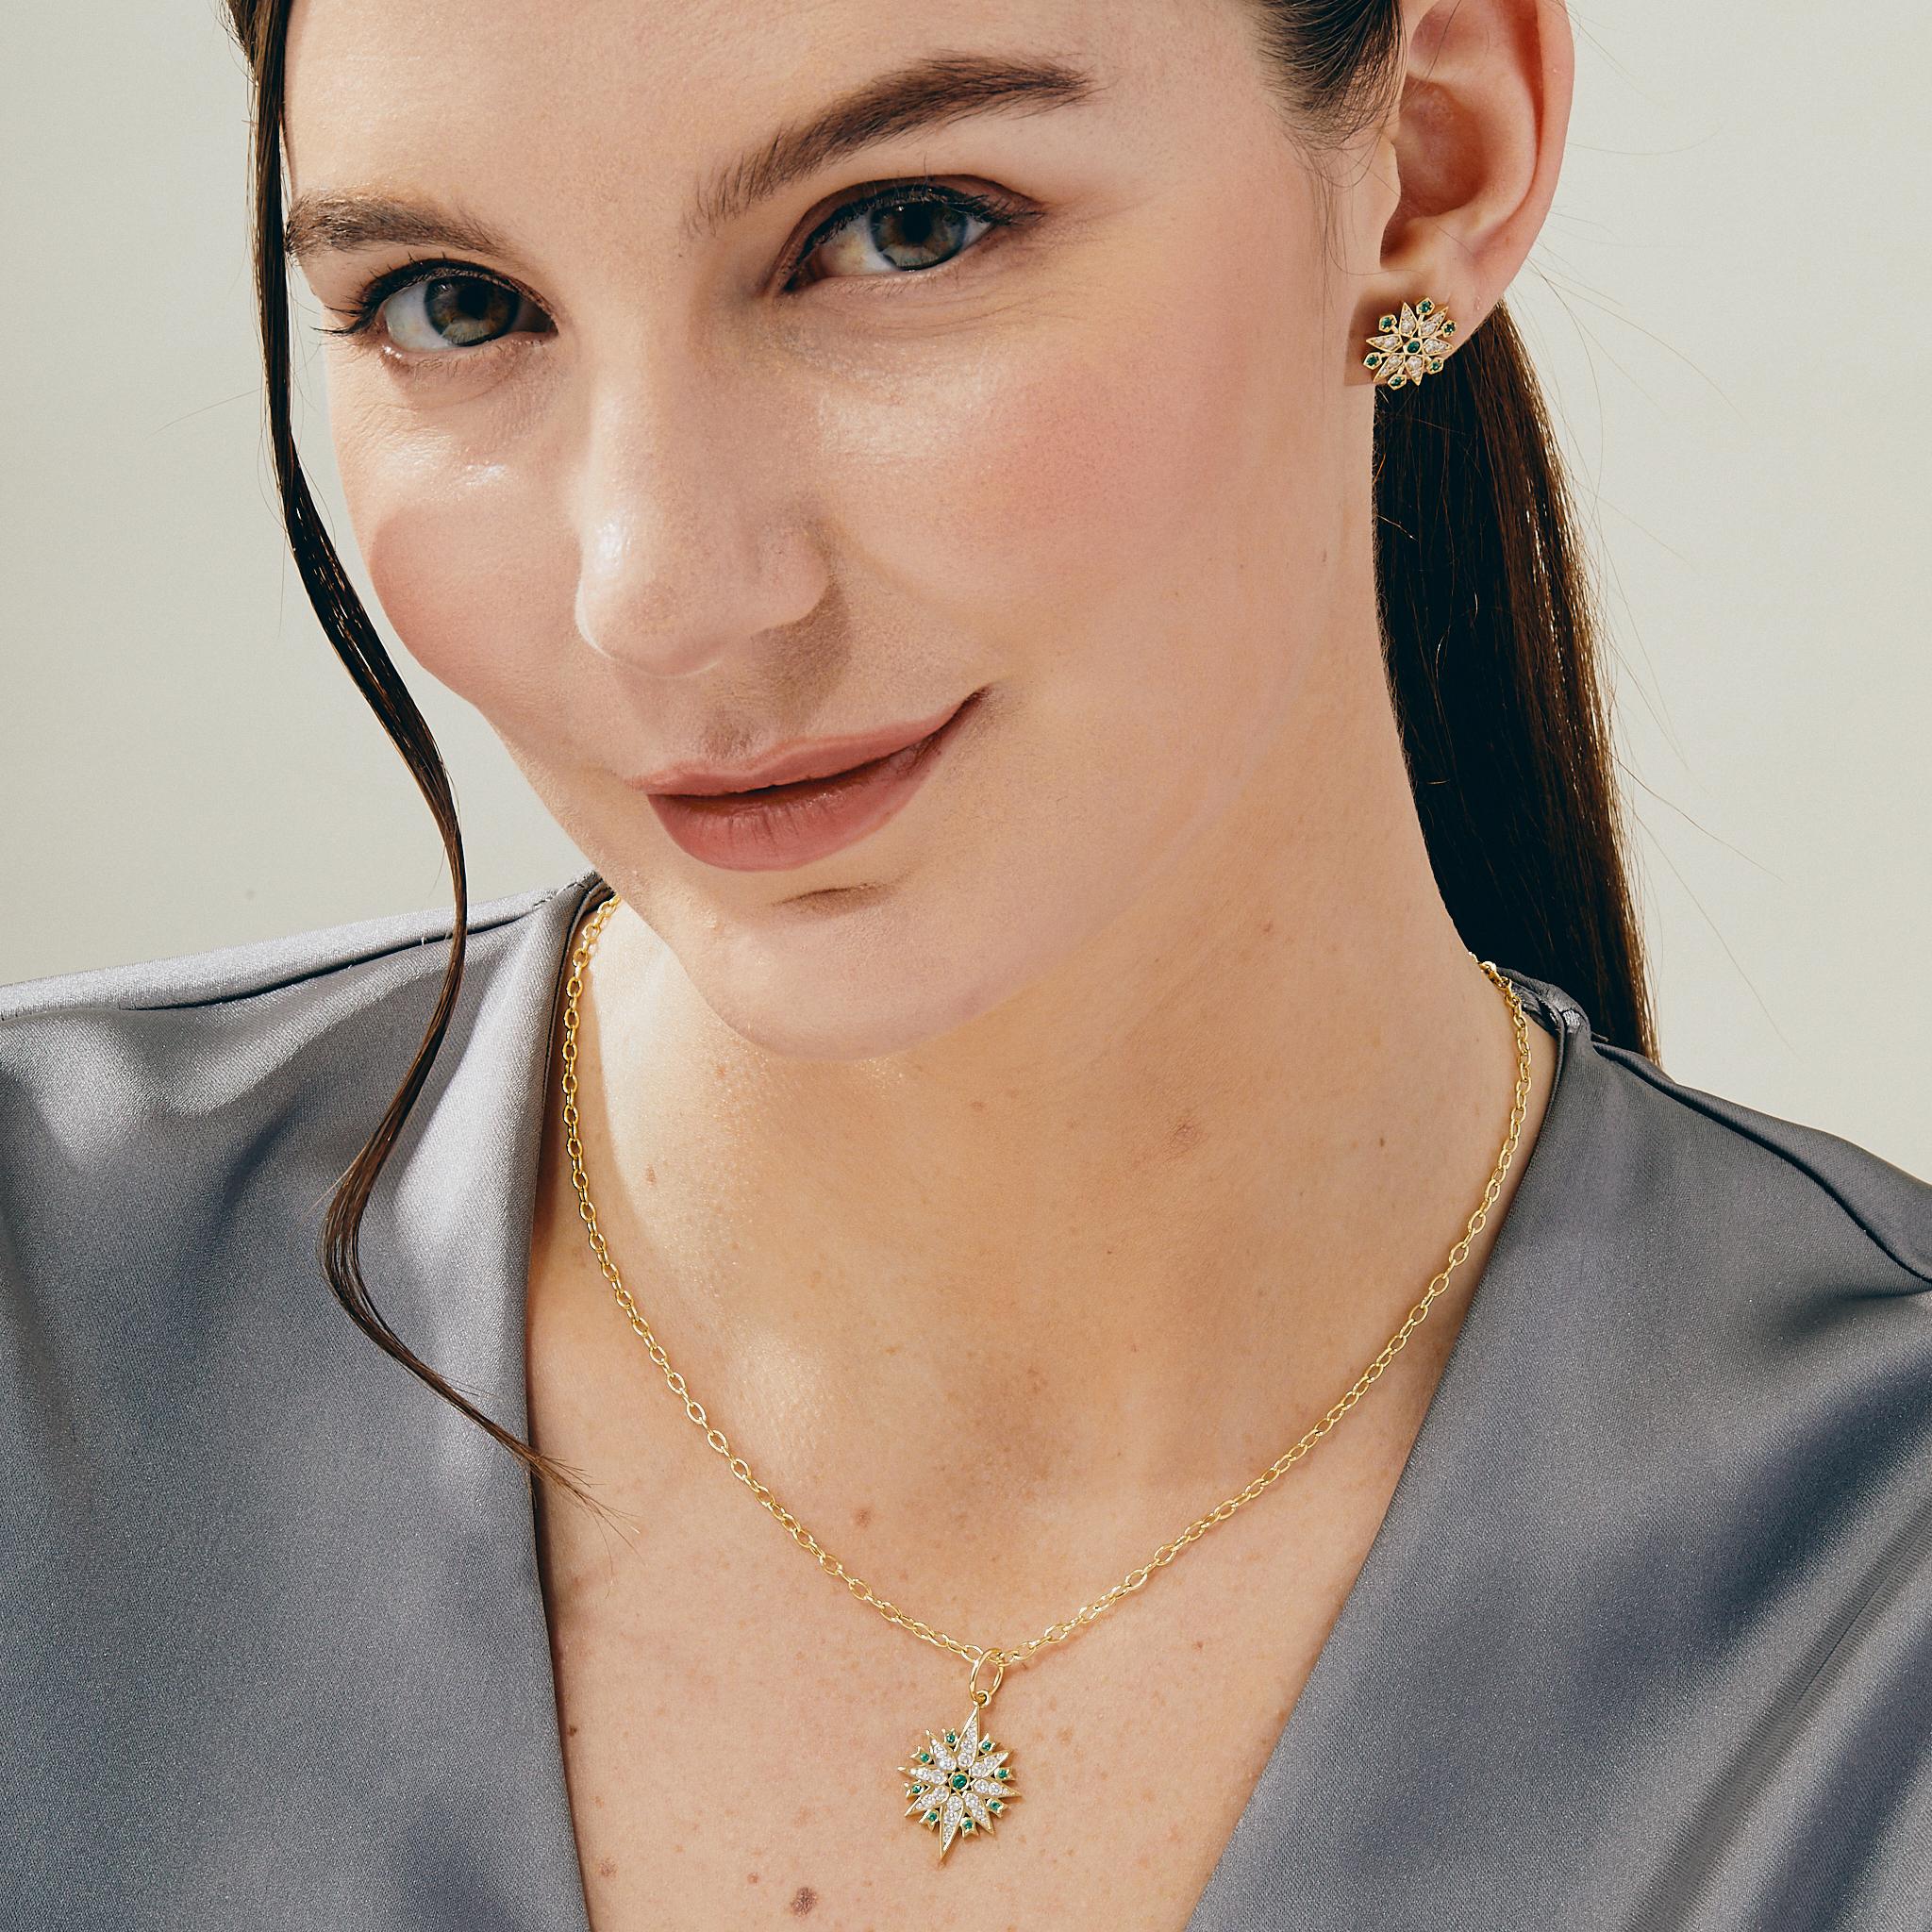 Created in 18 karat yellow gold
Emeralds 0.10 carat approx.
Diamonds 0.50 carat approx.
Limited edition
Chain sold separately

Meticulously crafted from 18 karat yellow gold, this exclusive edition pendant is encrusted with 0.10 carat emeralds and